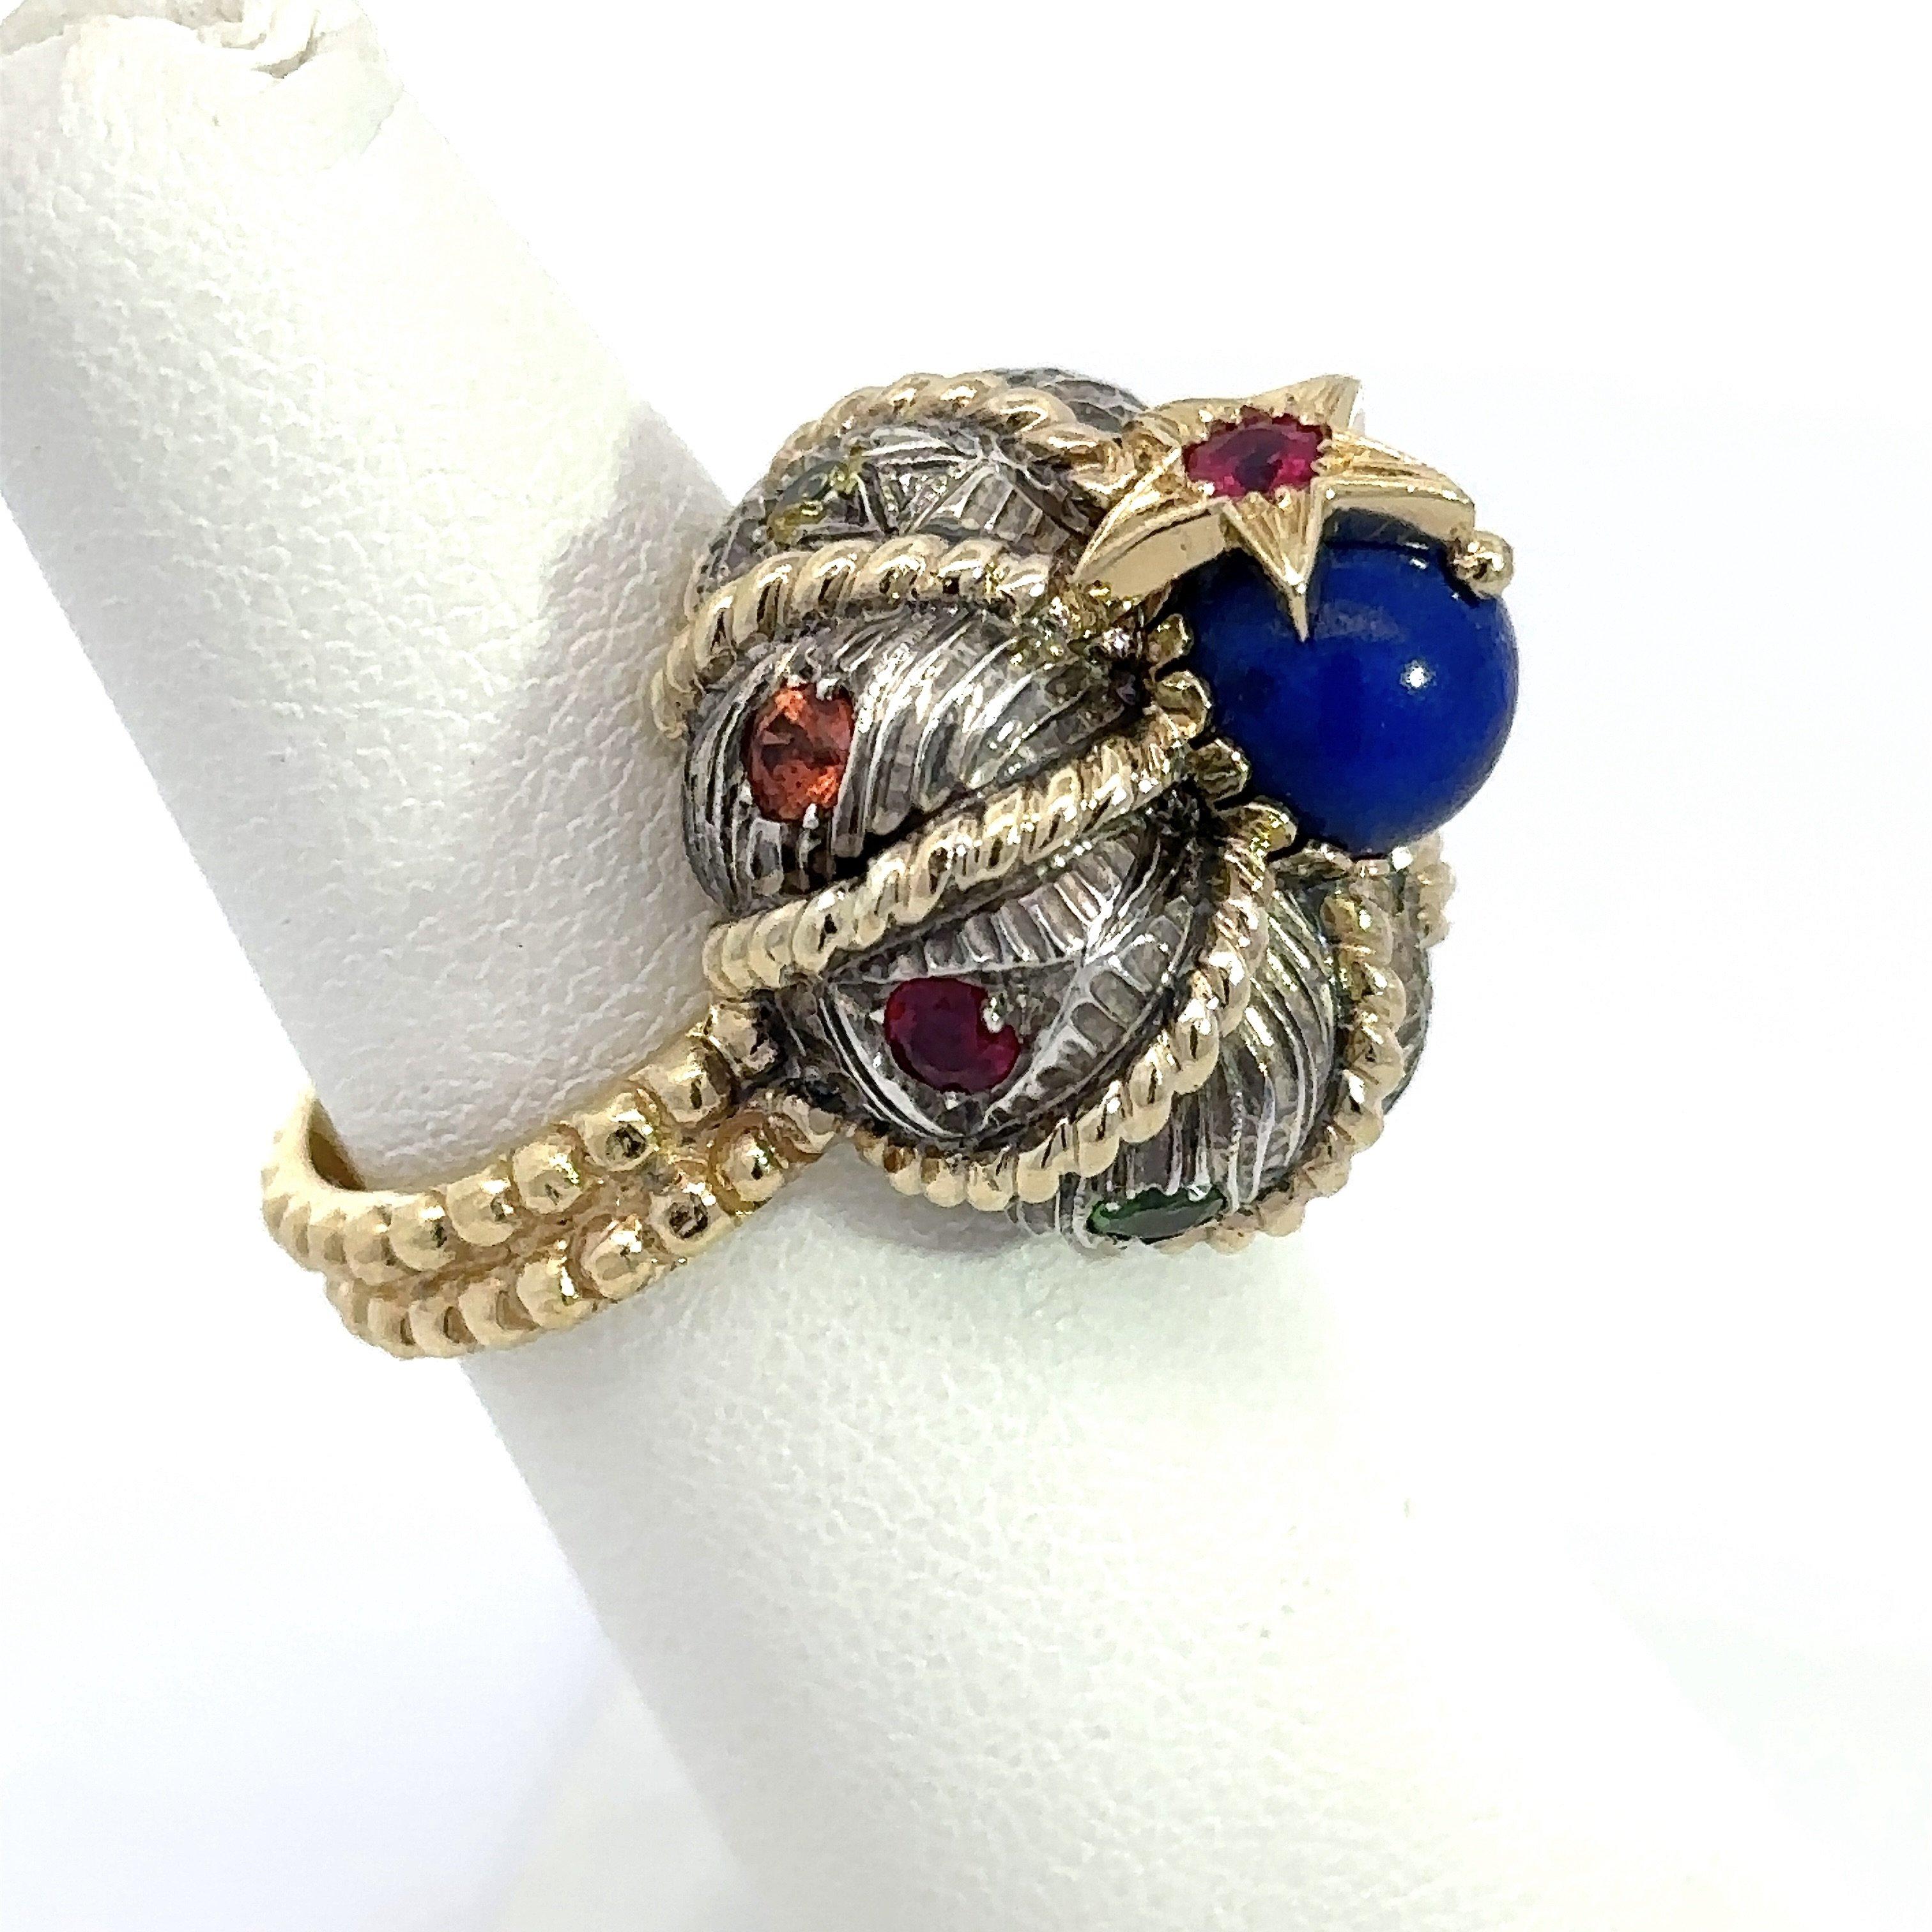 This signature Turban ring from Nardi Venice features a Moorish style turban crafted in sterling silver and 18KT yellow gold and surrounded by multi-color, flush-set gemstones. Atop the ring sits a lapis lazuli gemstone with a star as the crowning